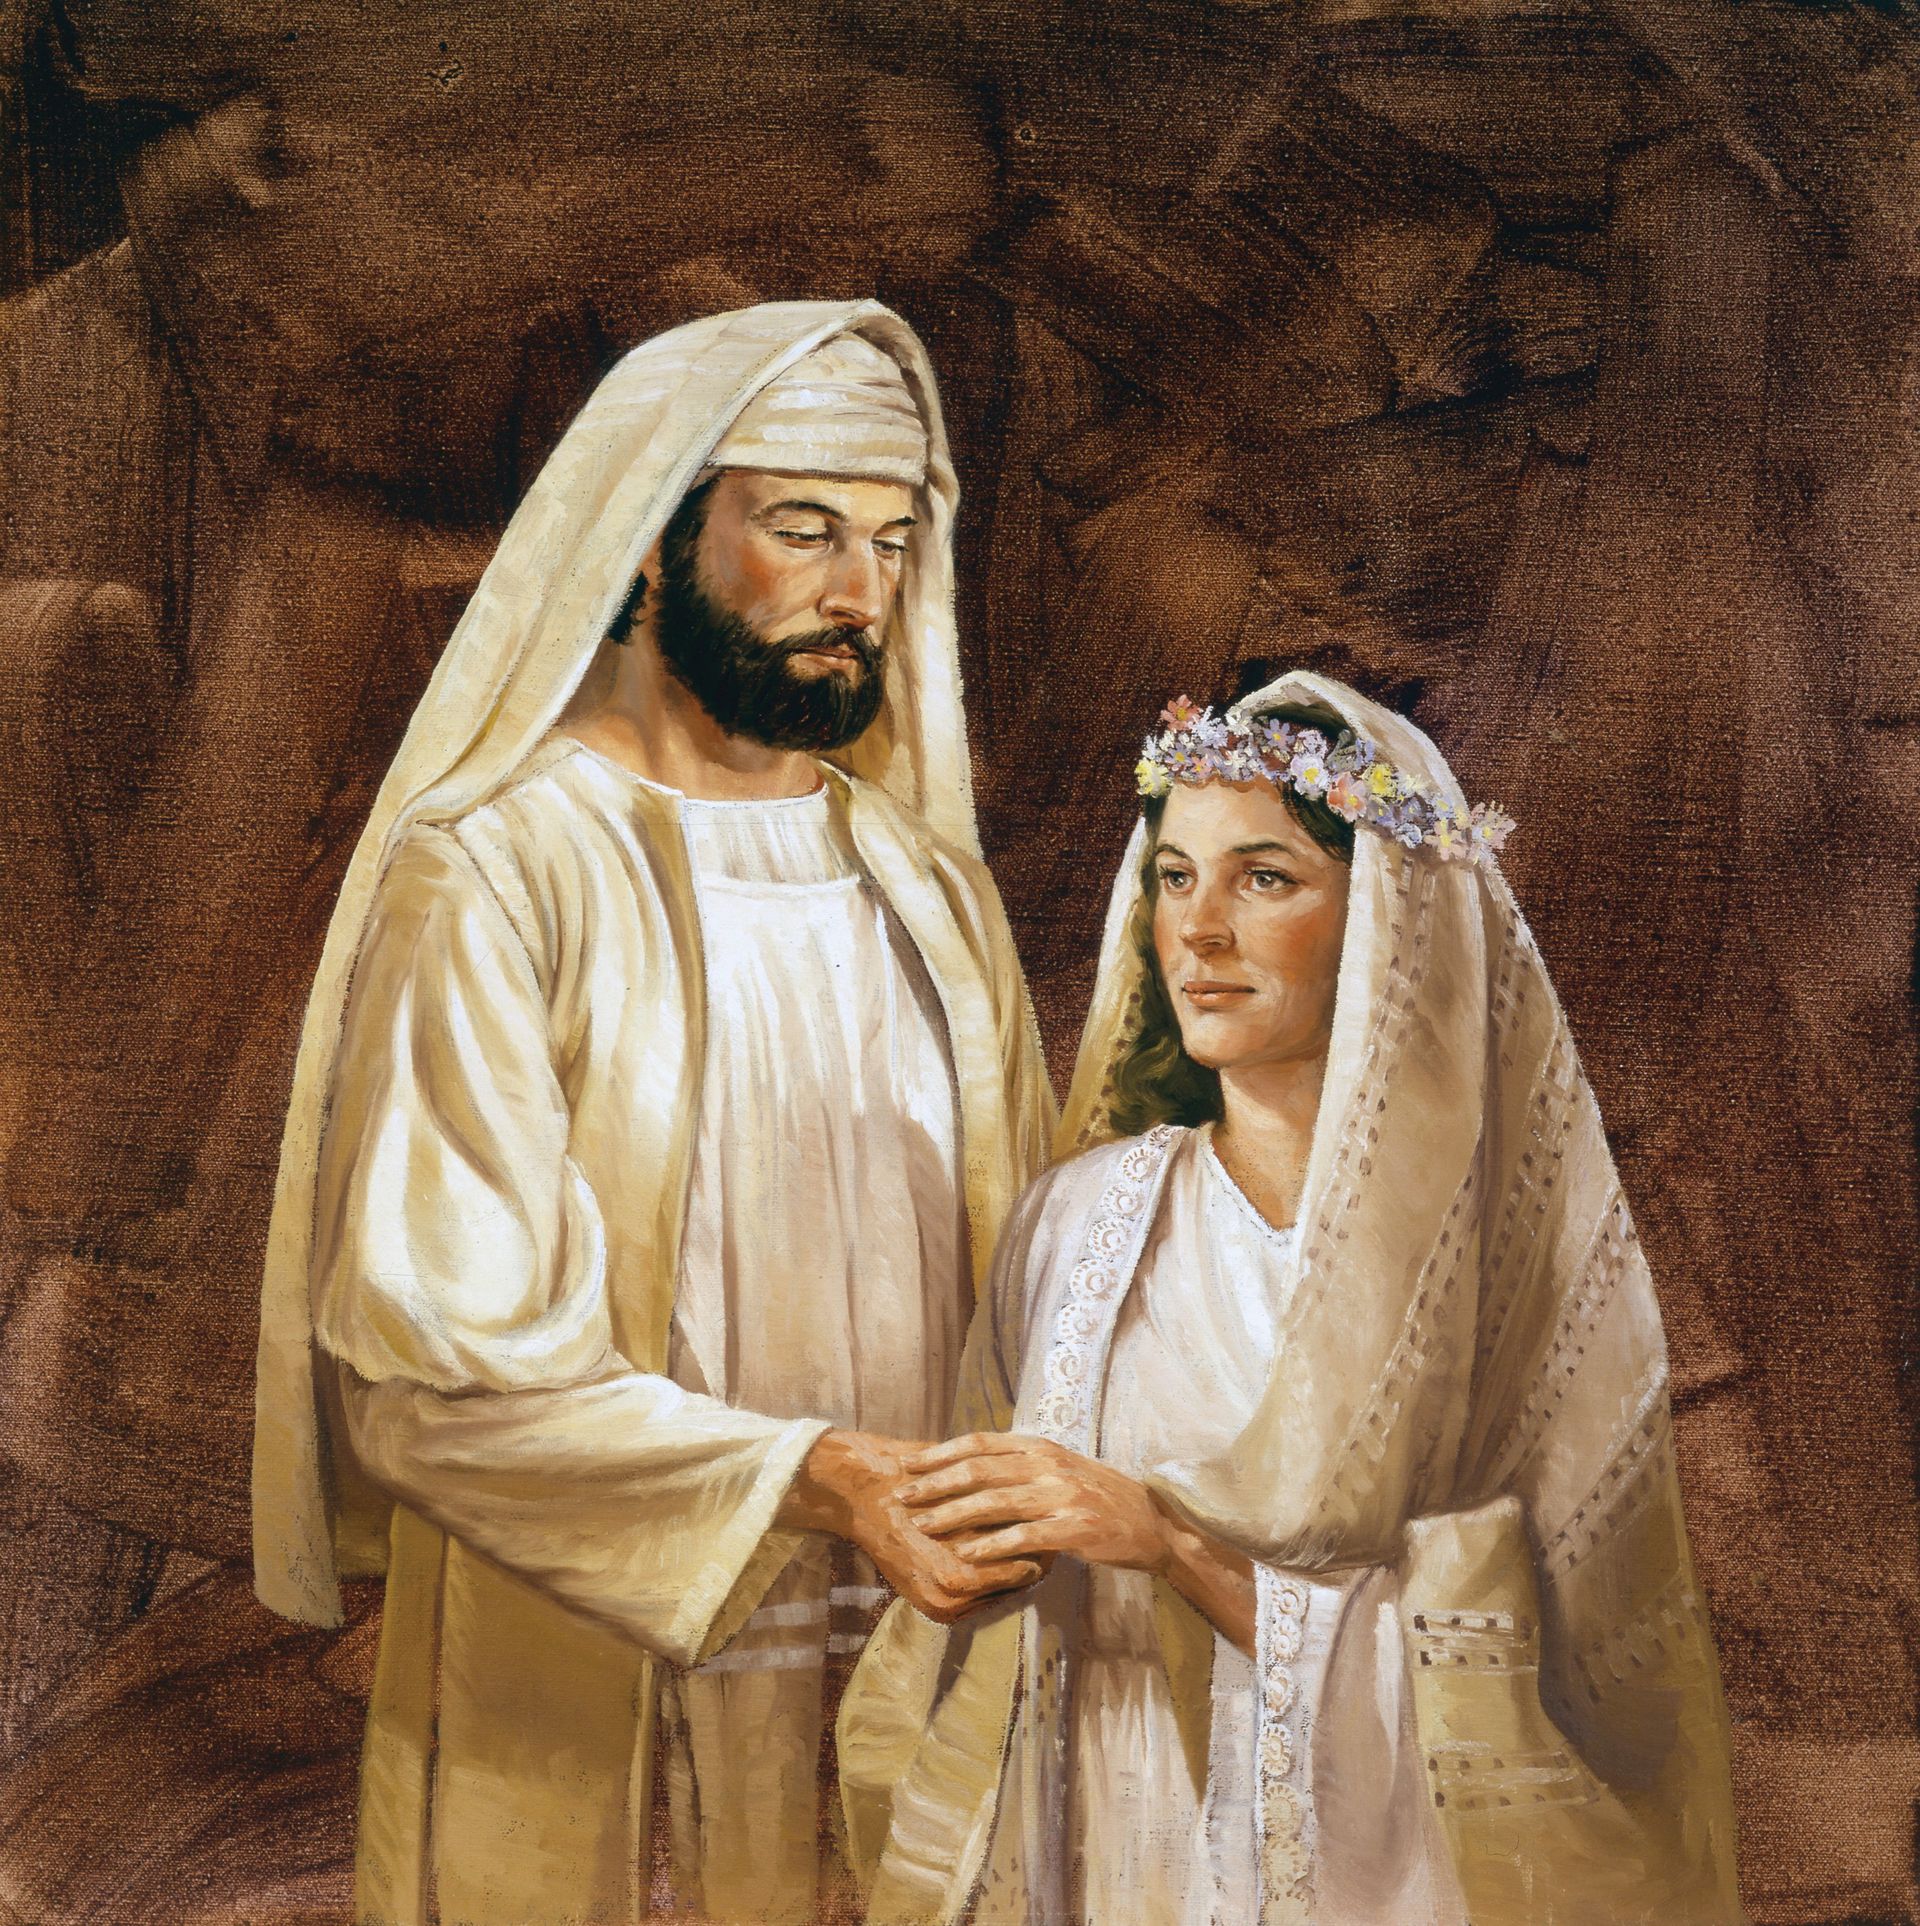 A depiction of a New Testament–era bride and groom, by Lyle Beddes.